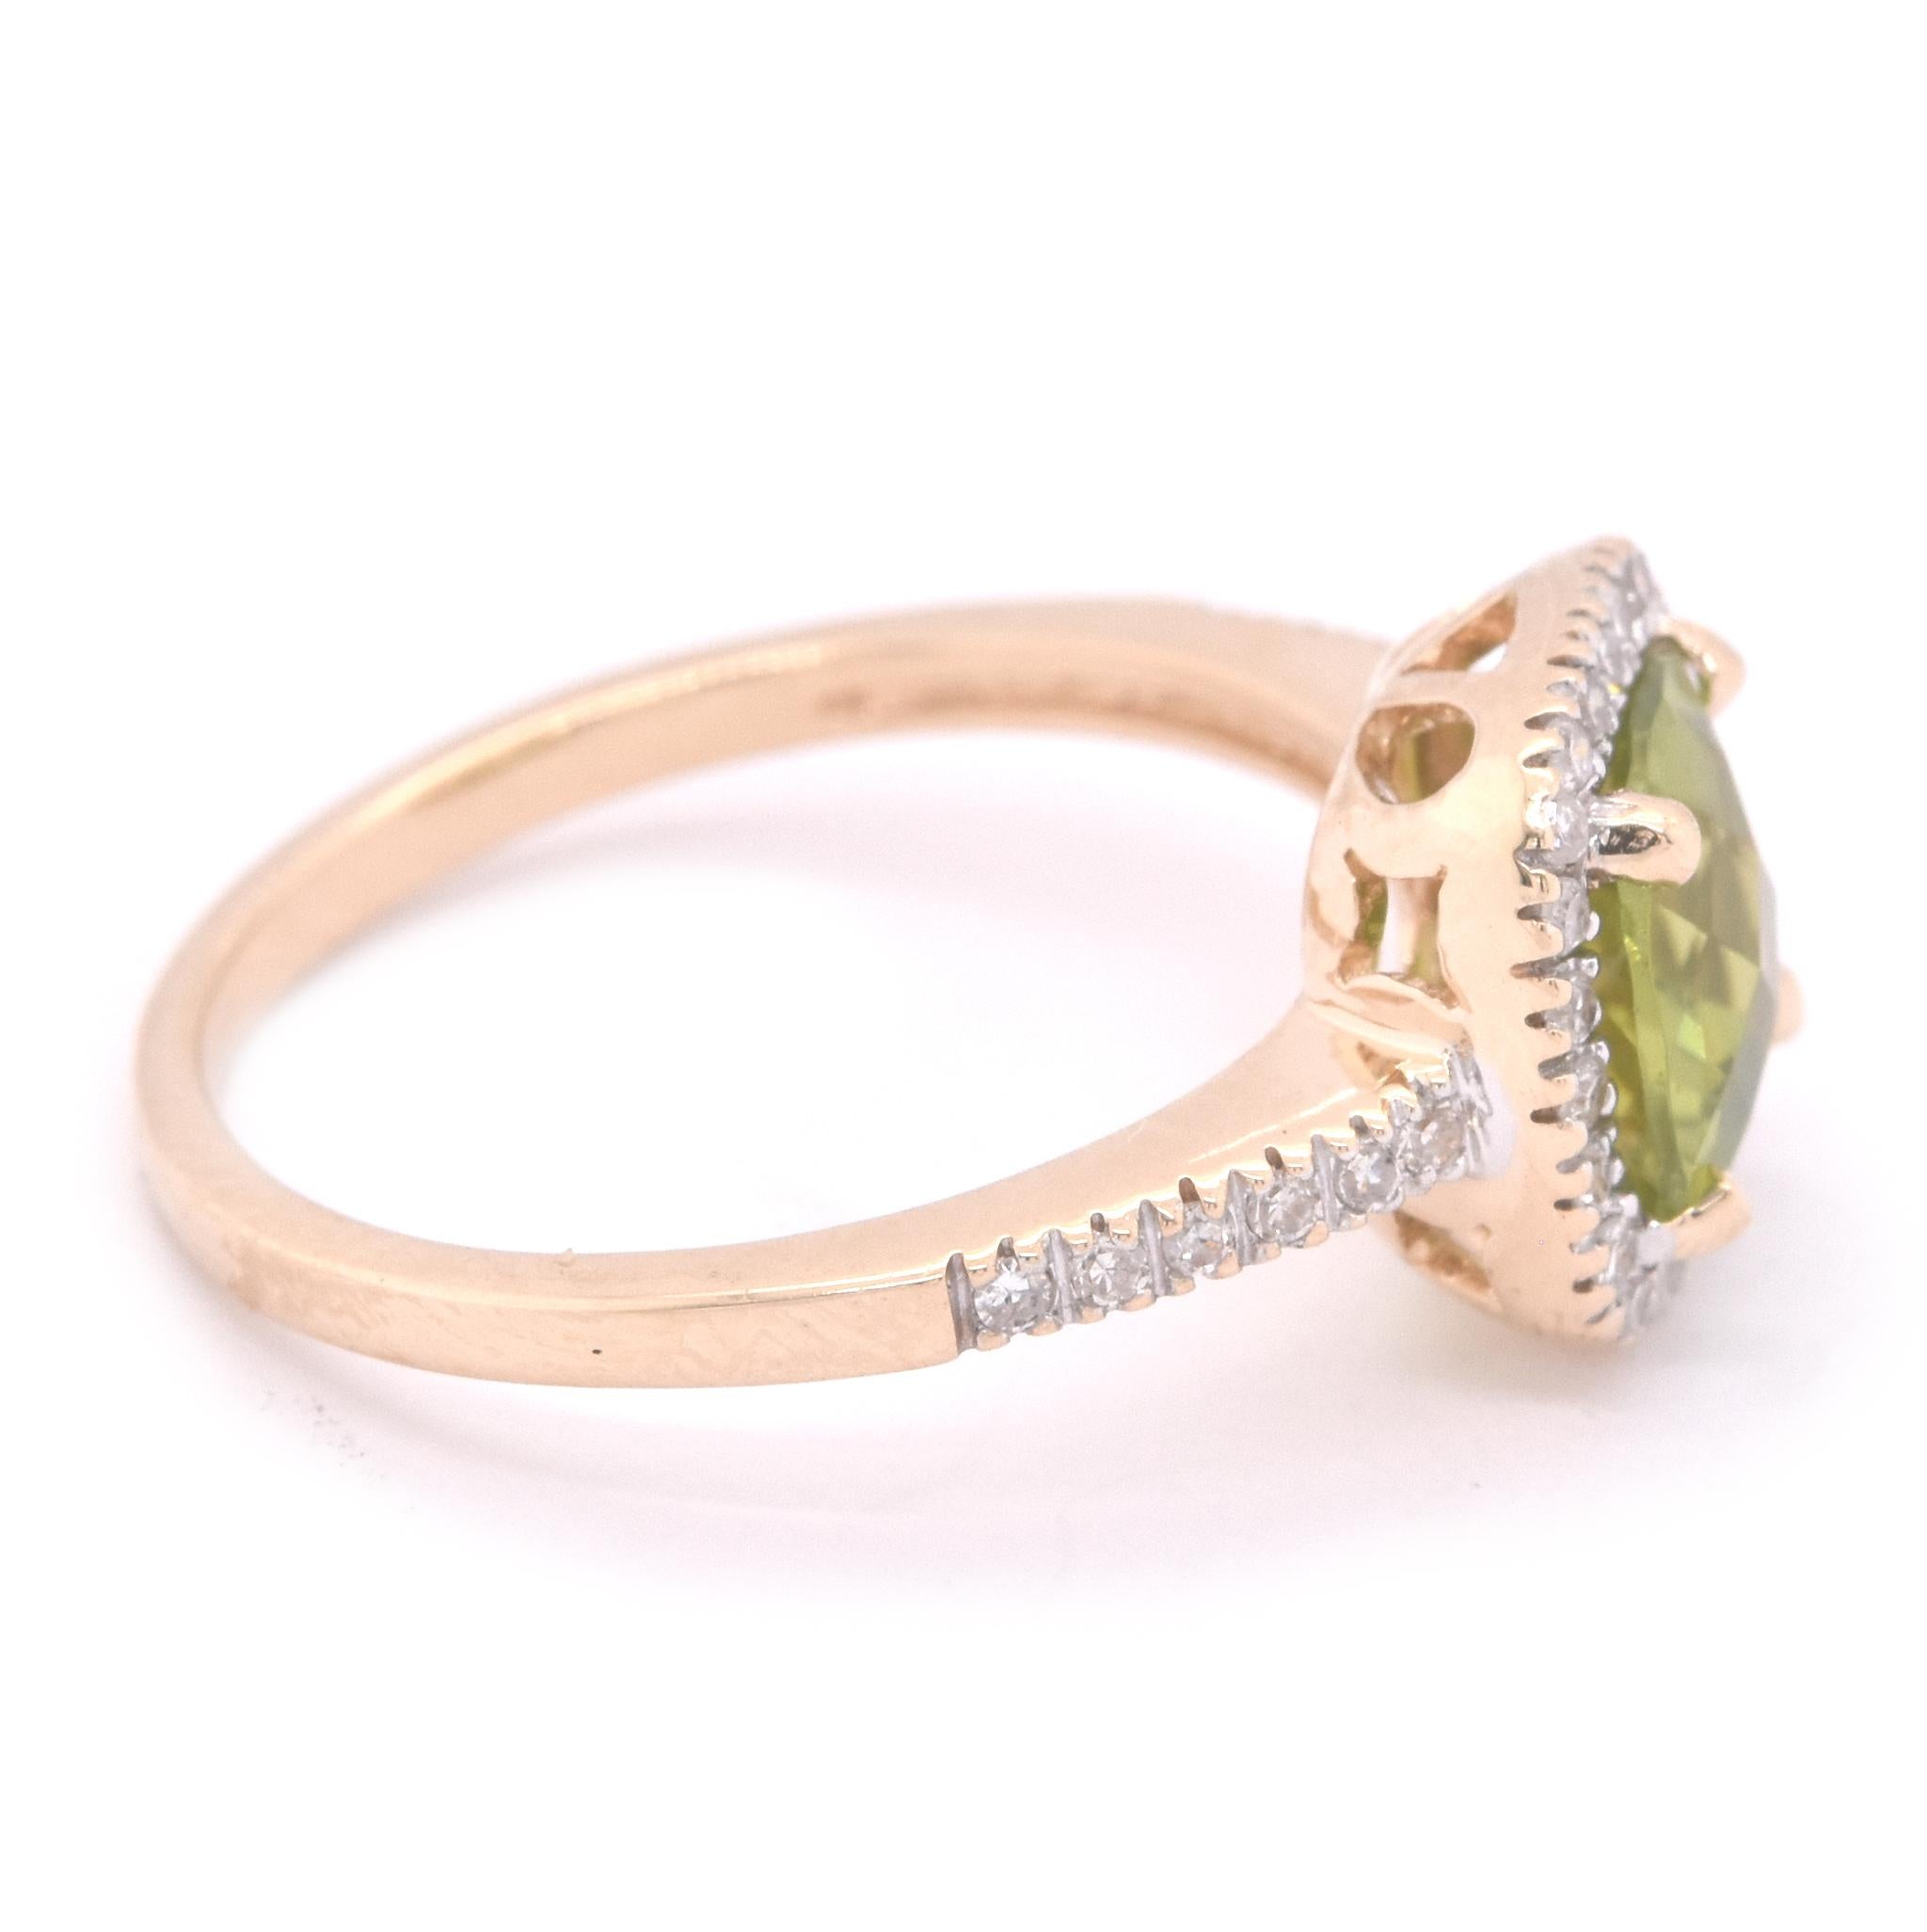 Designer: custom
Material: 14K yellow gold
Gemstone: 1 cushion cut peridot = 1.60ct
Diamonds: 36 round brilliant cuts = 0.36cttw
Color: H
Clarity: SI
Ring Size: 6 (please allow up to 2 additional business days for sizing requests)
Dimensions: ring